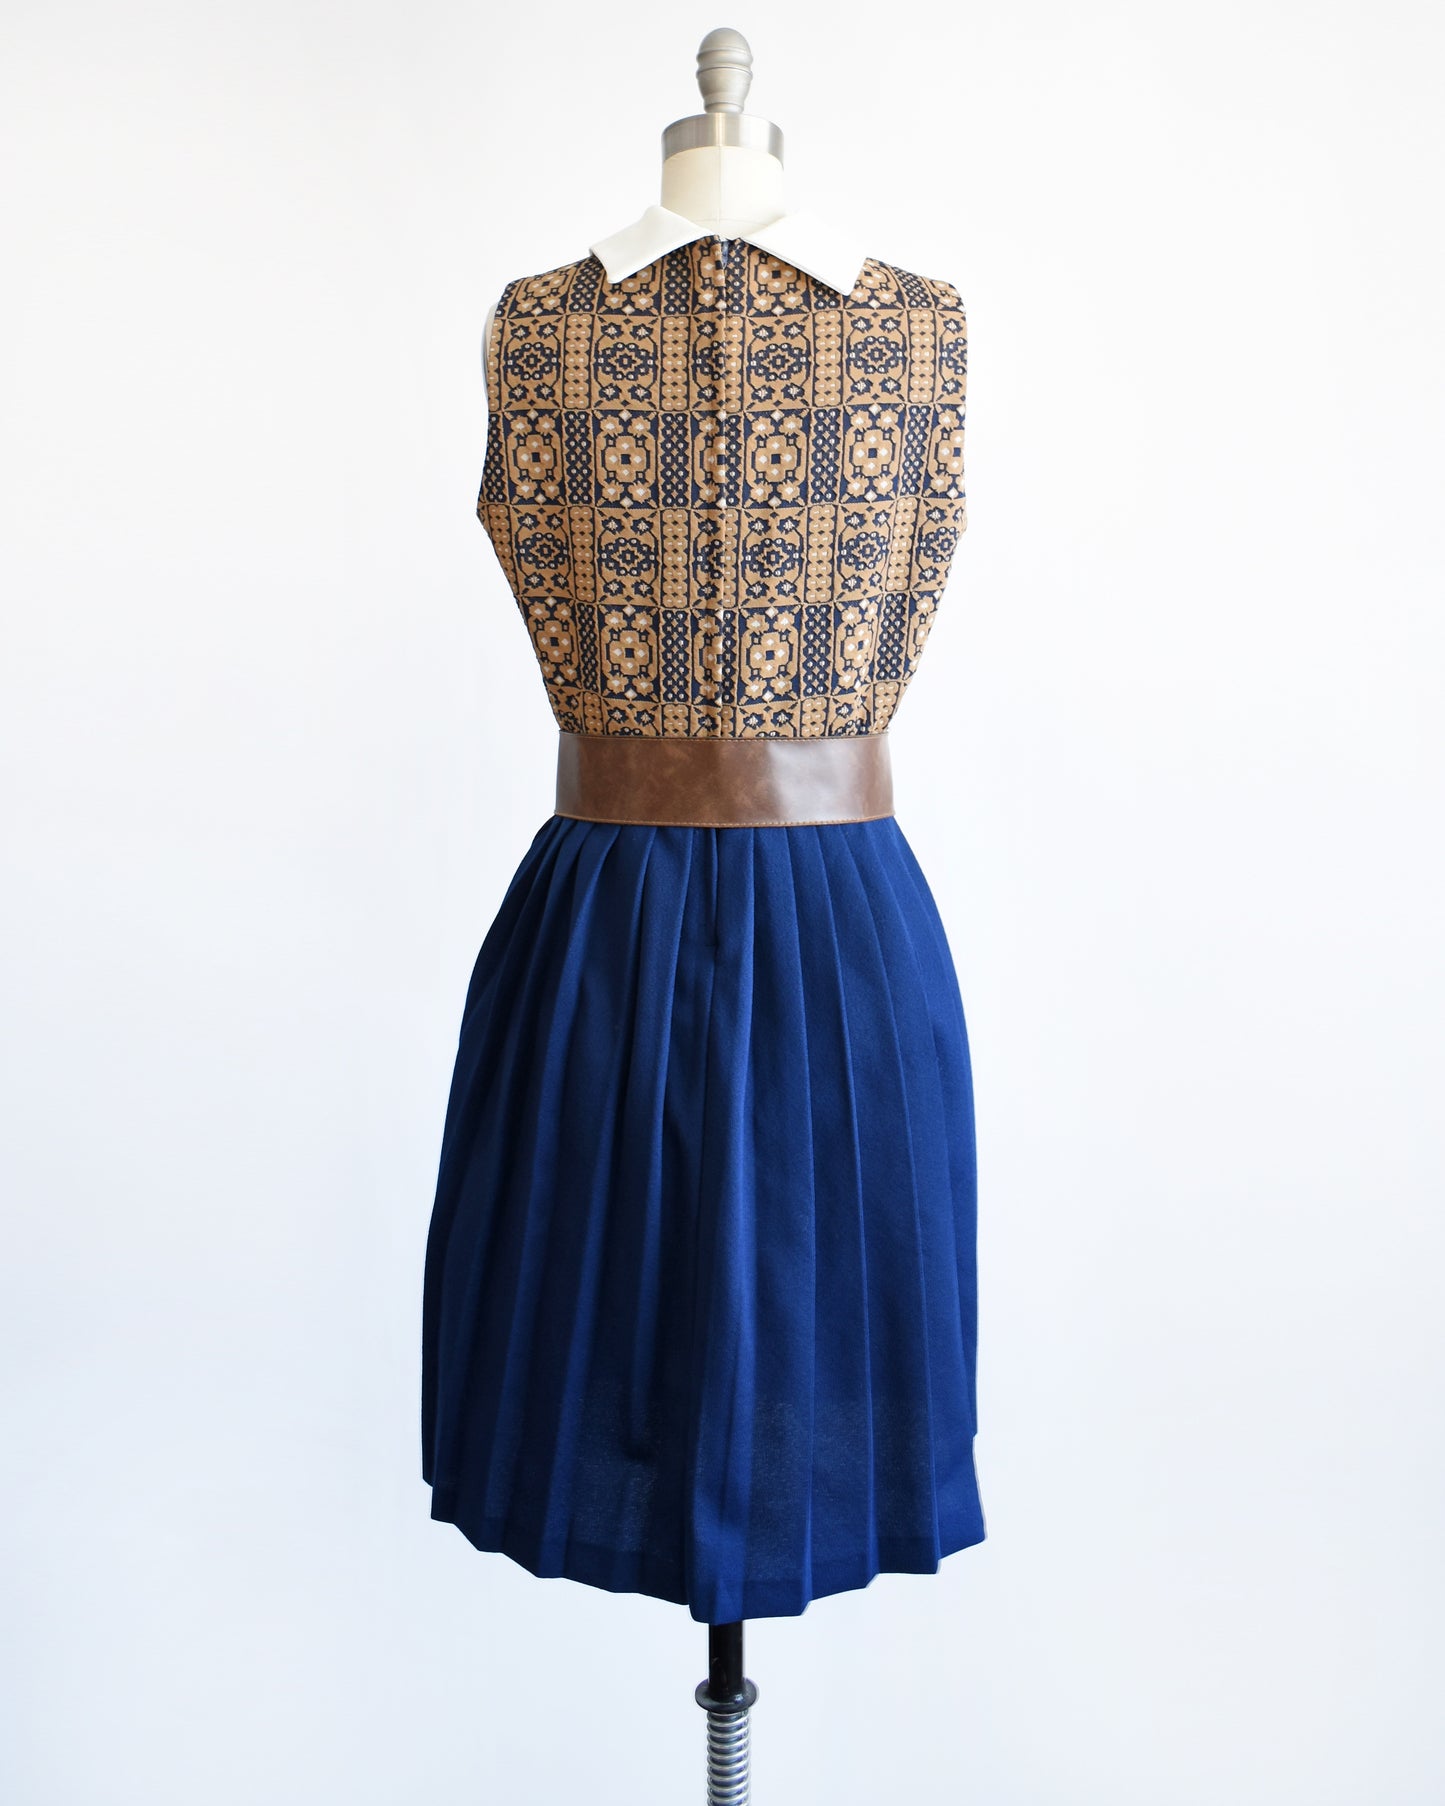 Back view of a vintage 1960s brown, blue, and white mod scooter dress.